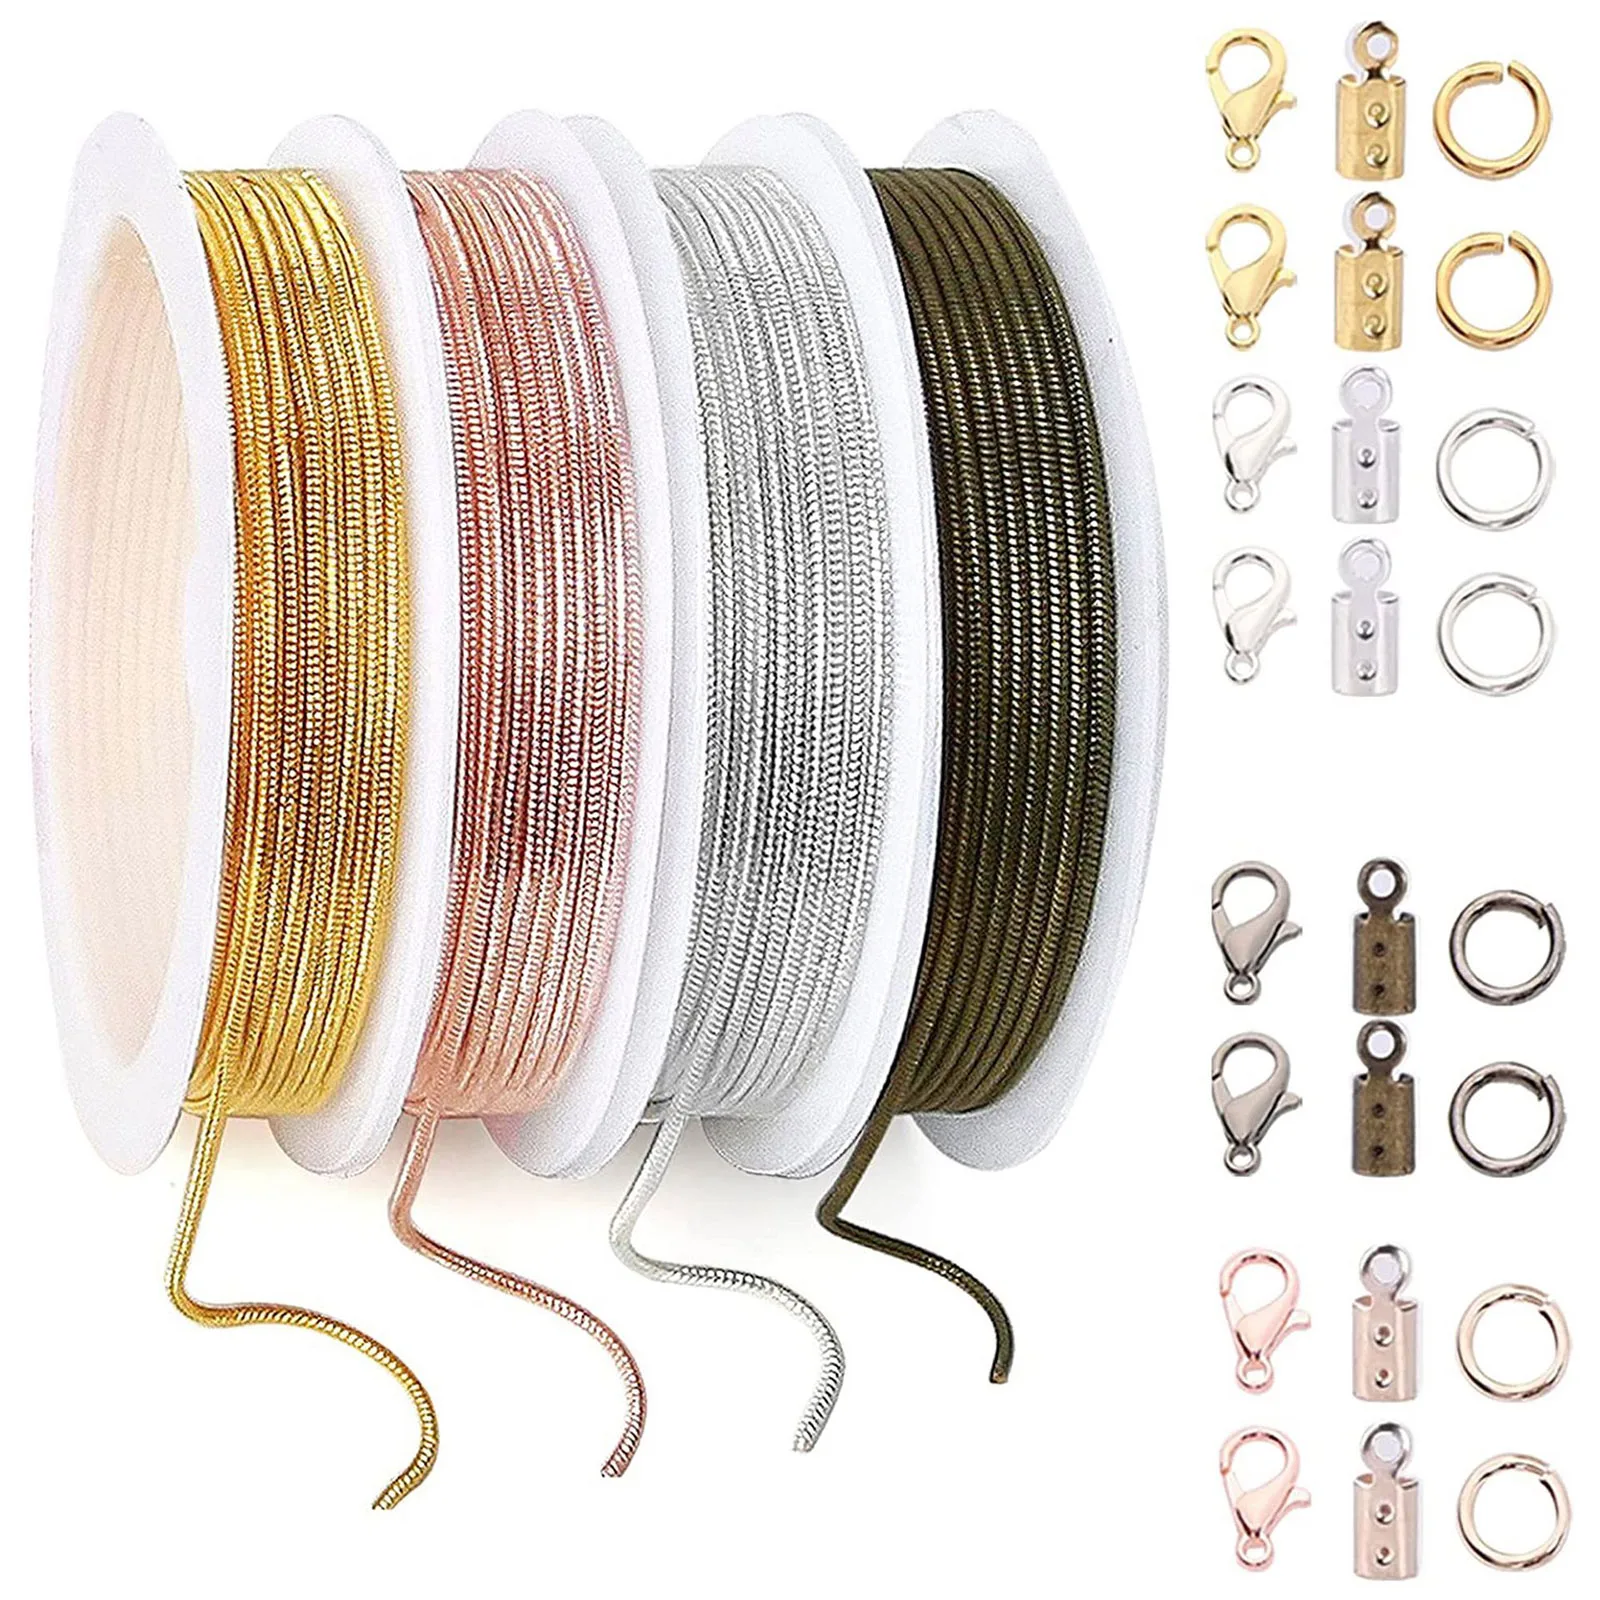 

1 Set Copper Jewelry Findings Kit Accessories 12m 1.2mm Snake Bone Chain Clip Open Ring Lobster Buckle Clasp Cord Ends